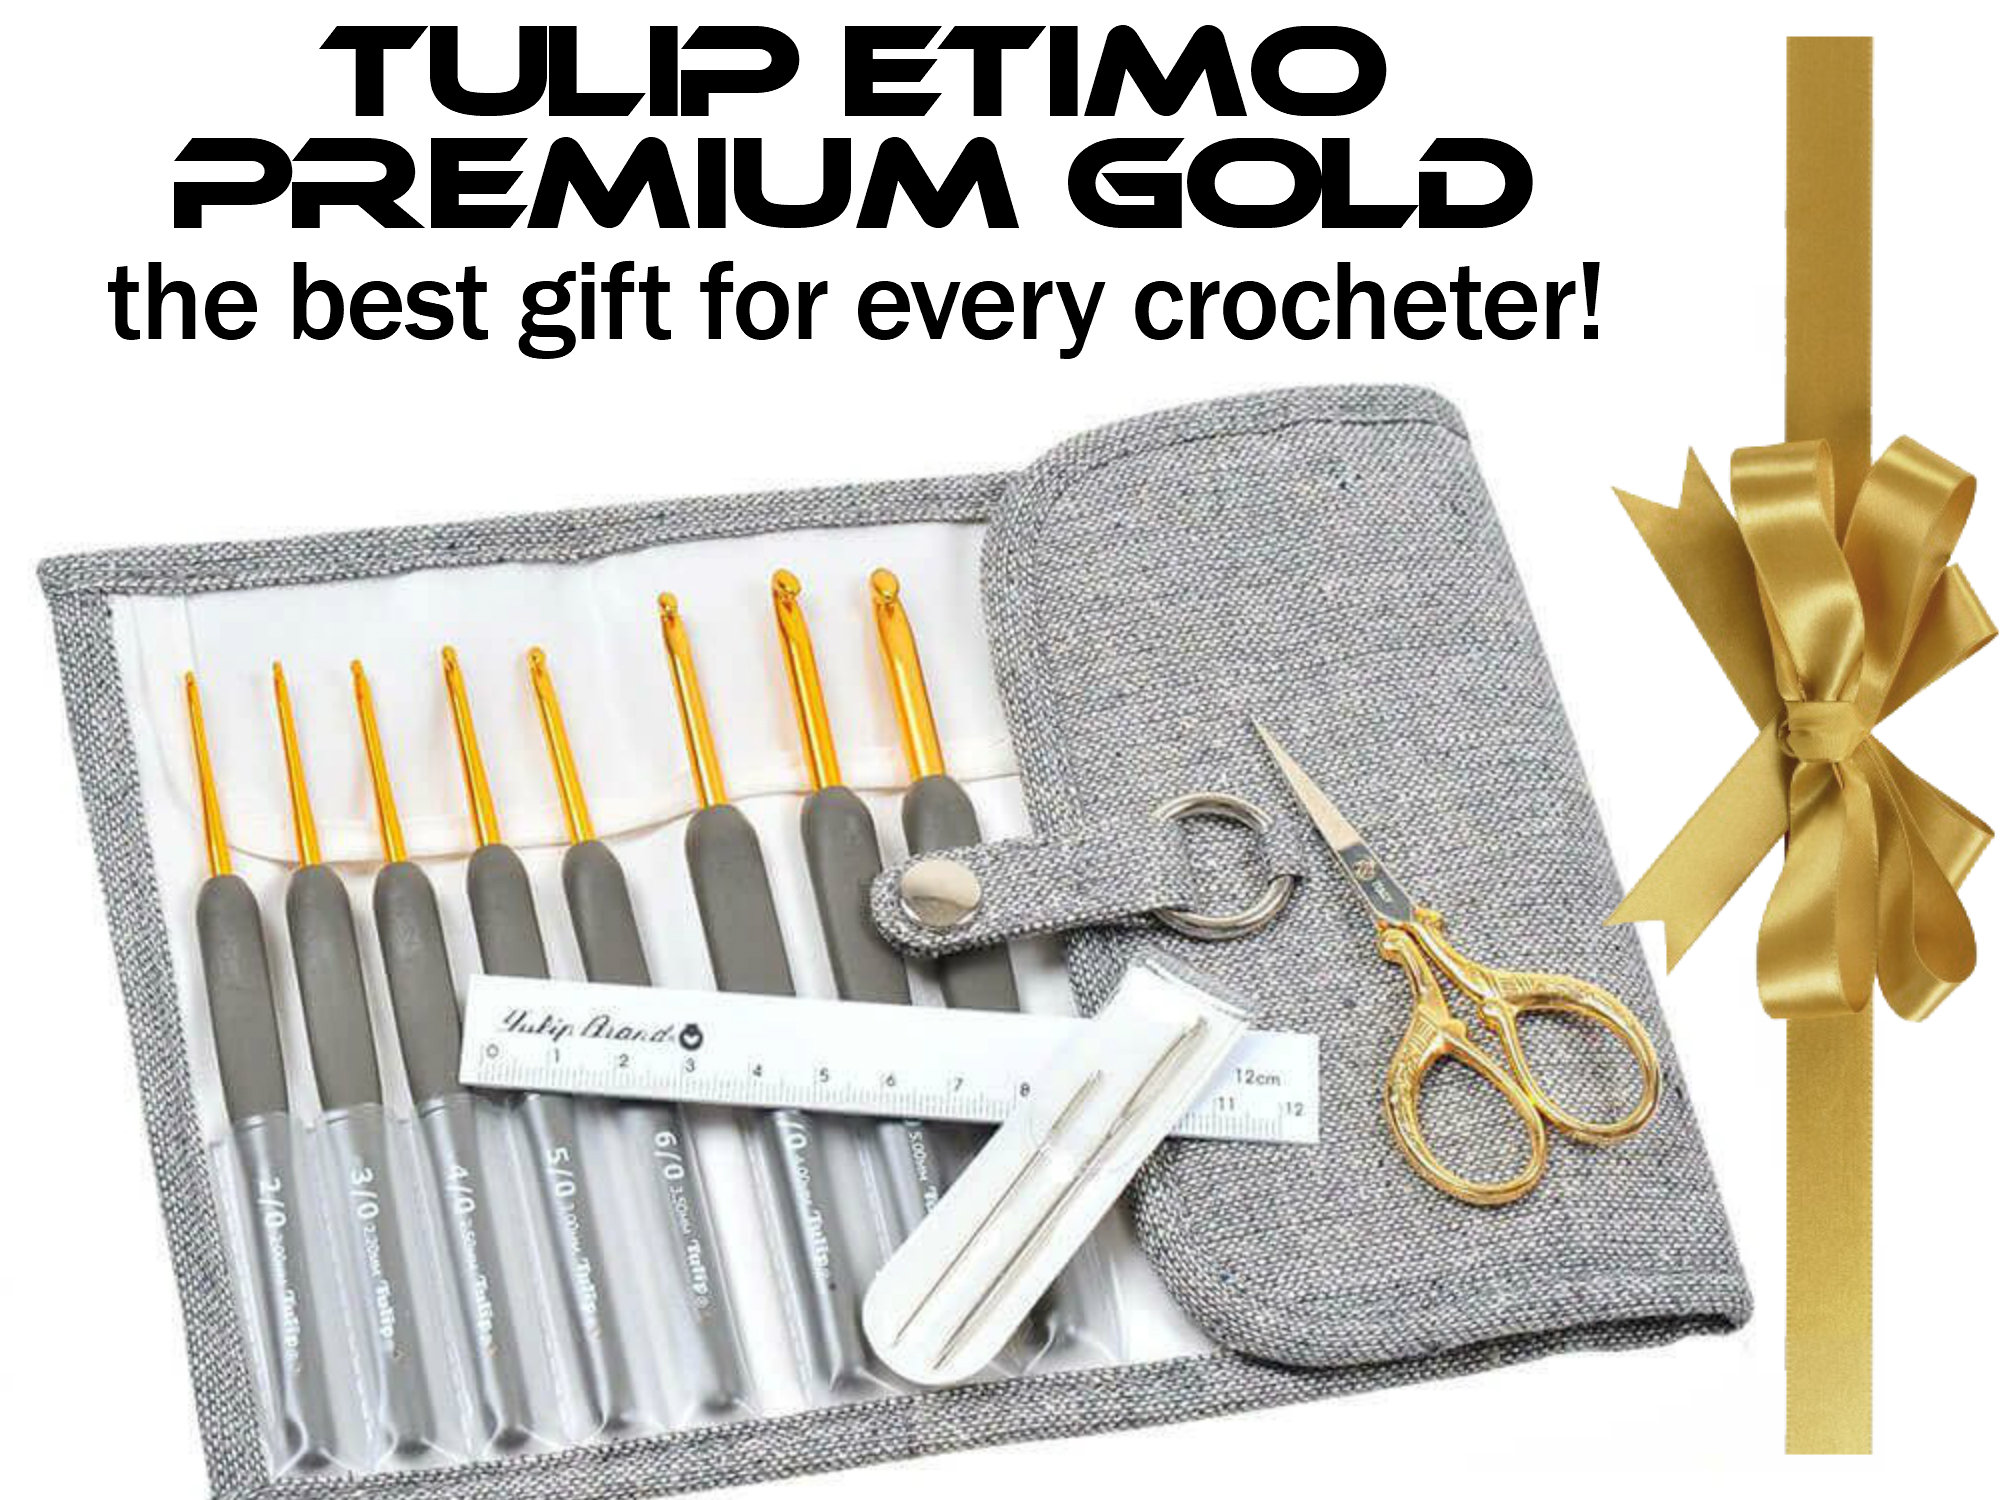 Tulip ETIMO Crochet Hooks With Cushion Grip in Gray and Gold